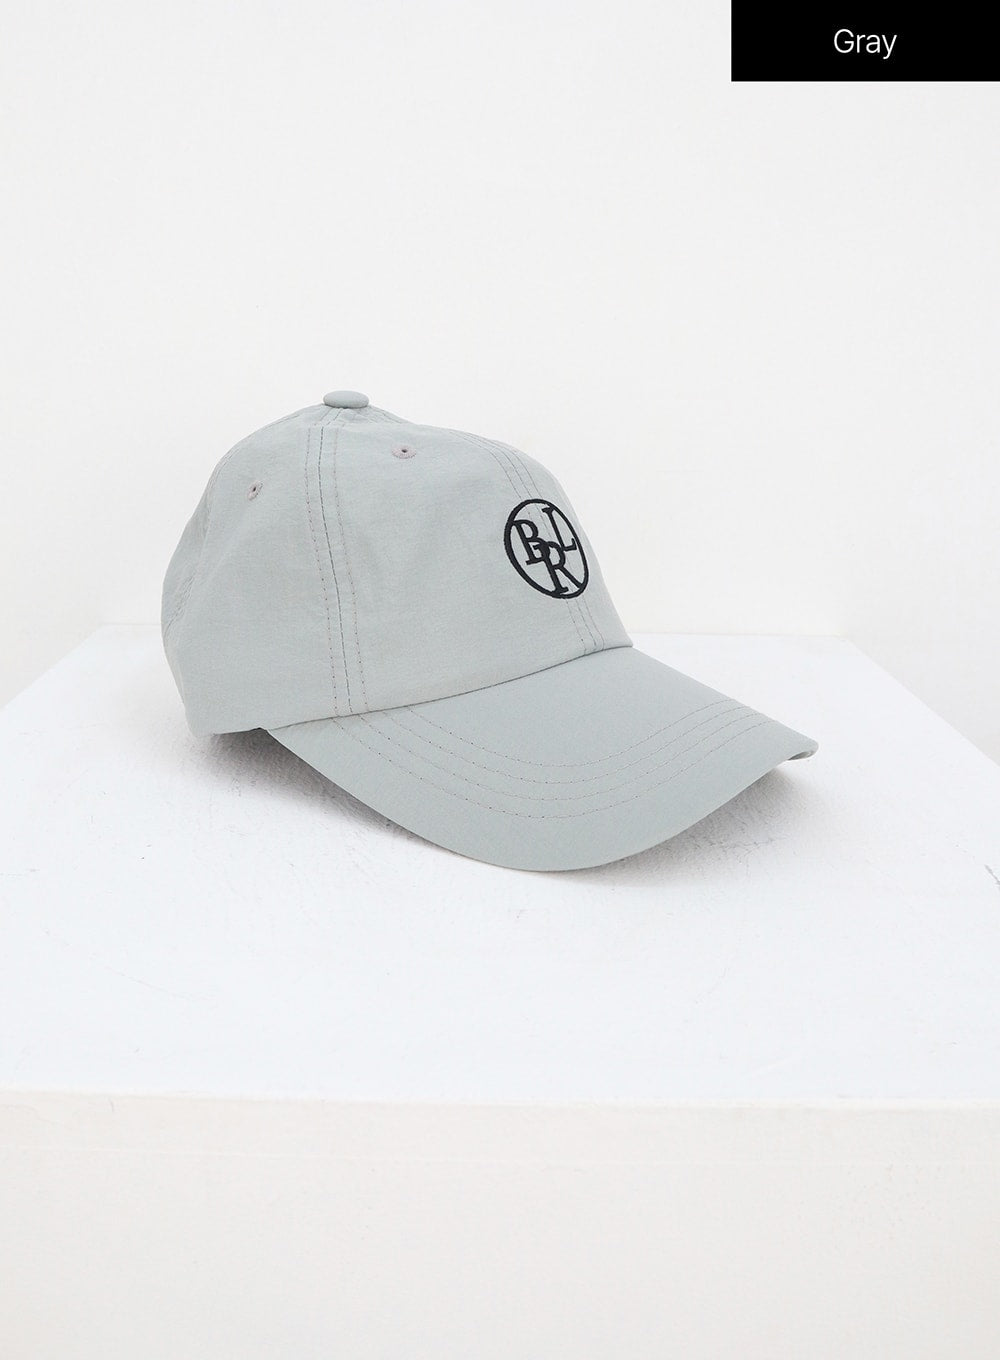 embroidered-baseball-cap-oy323